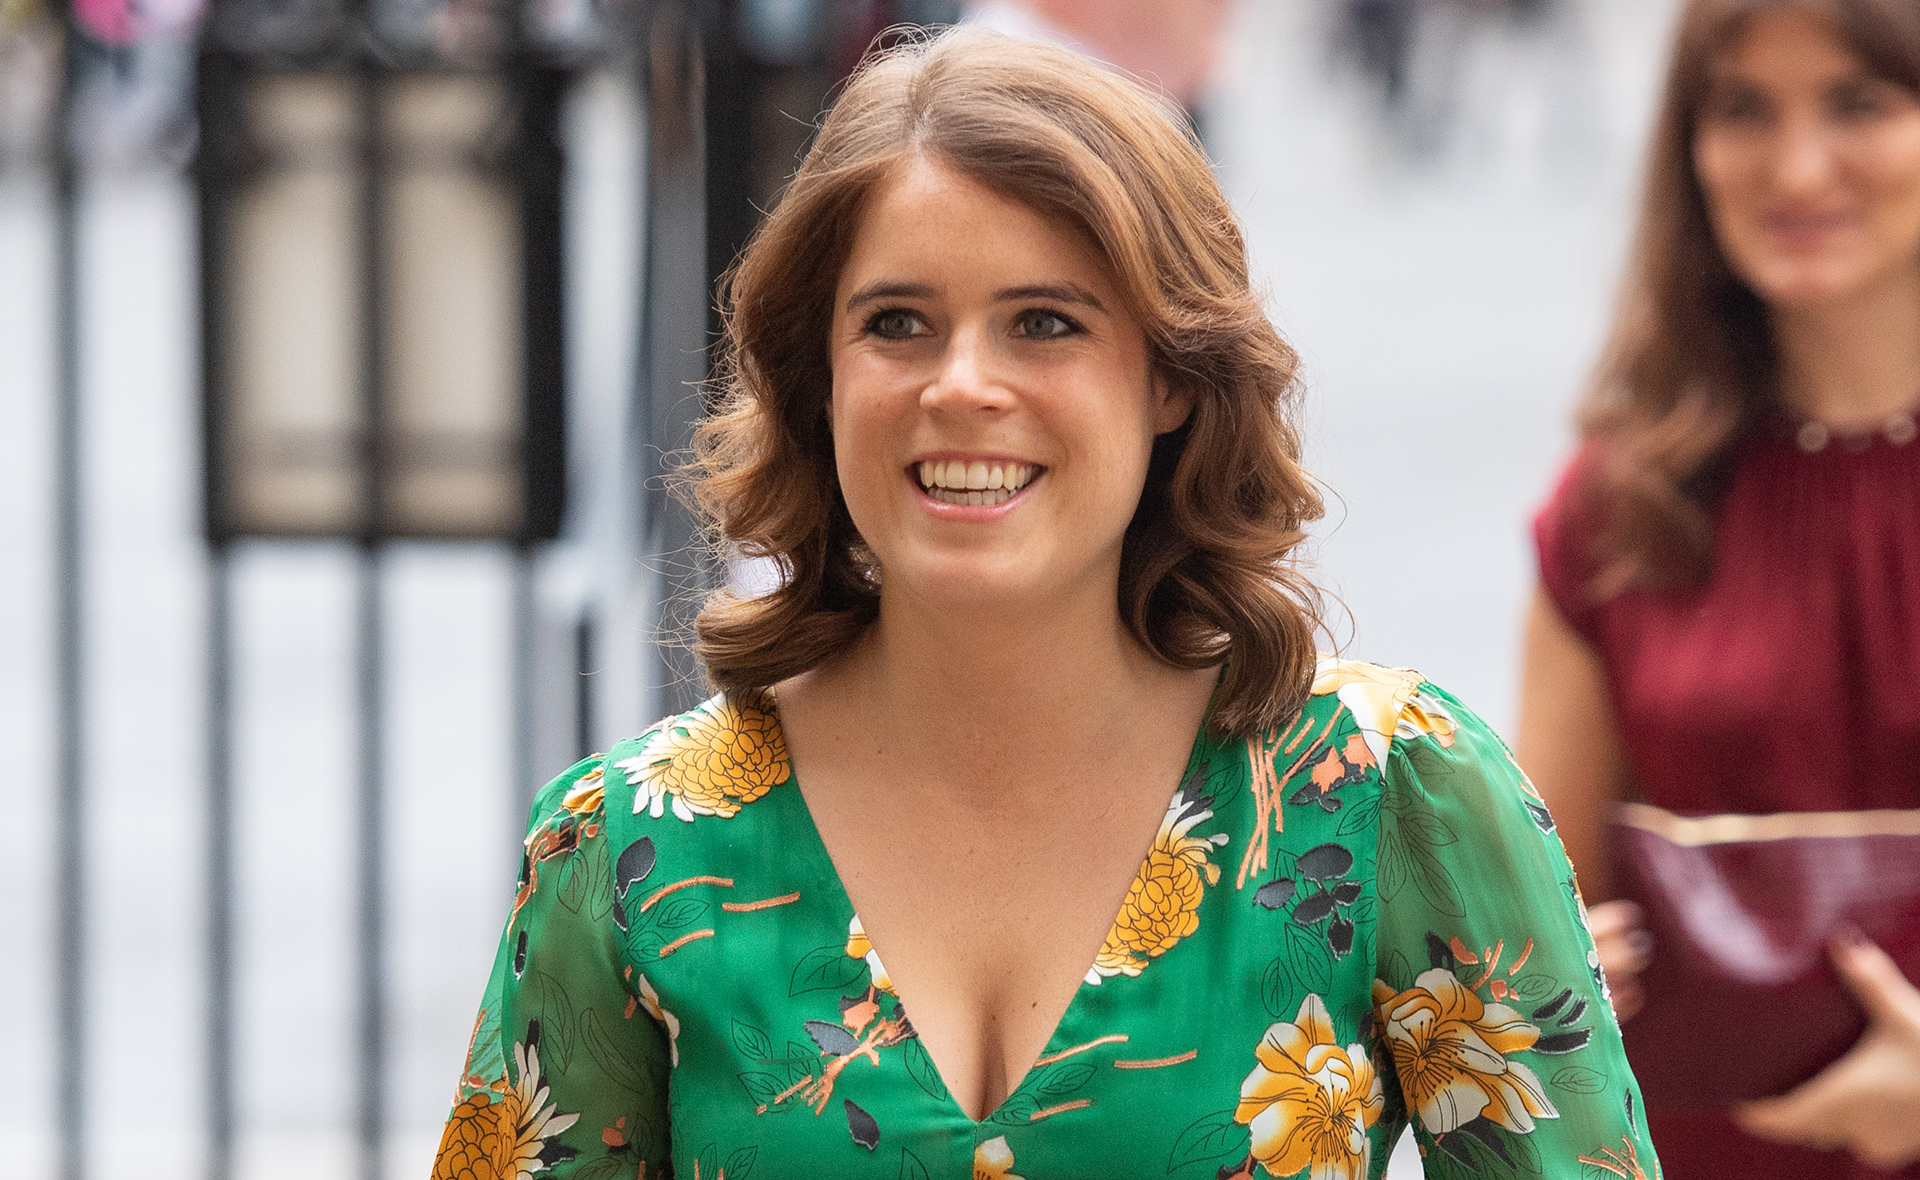 Princess Eugenie shares never-before-seen pregnancy photos showing off her baby bump